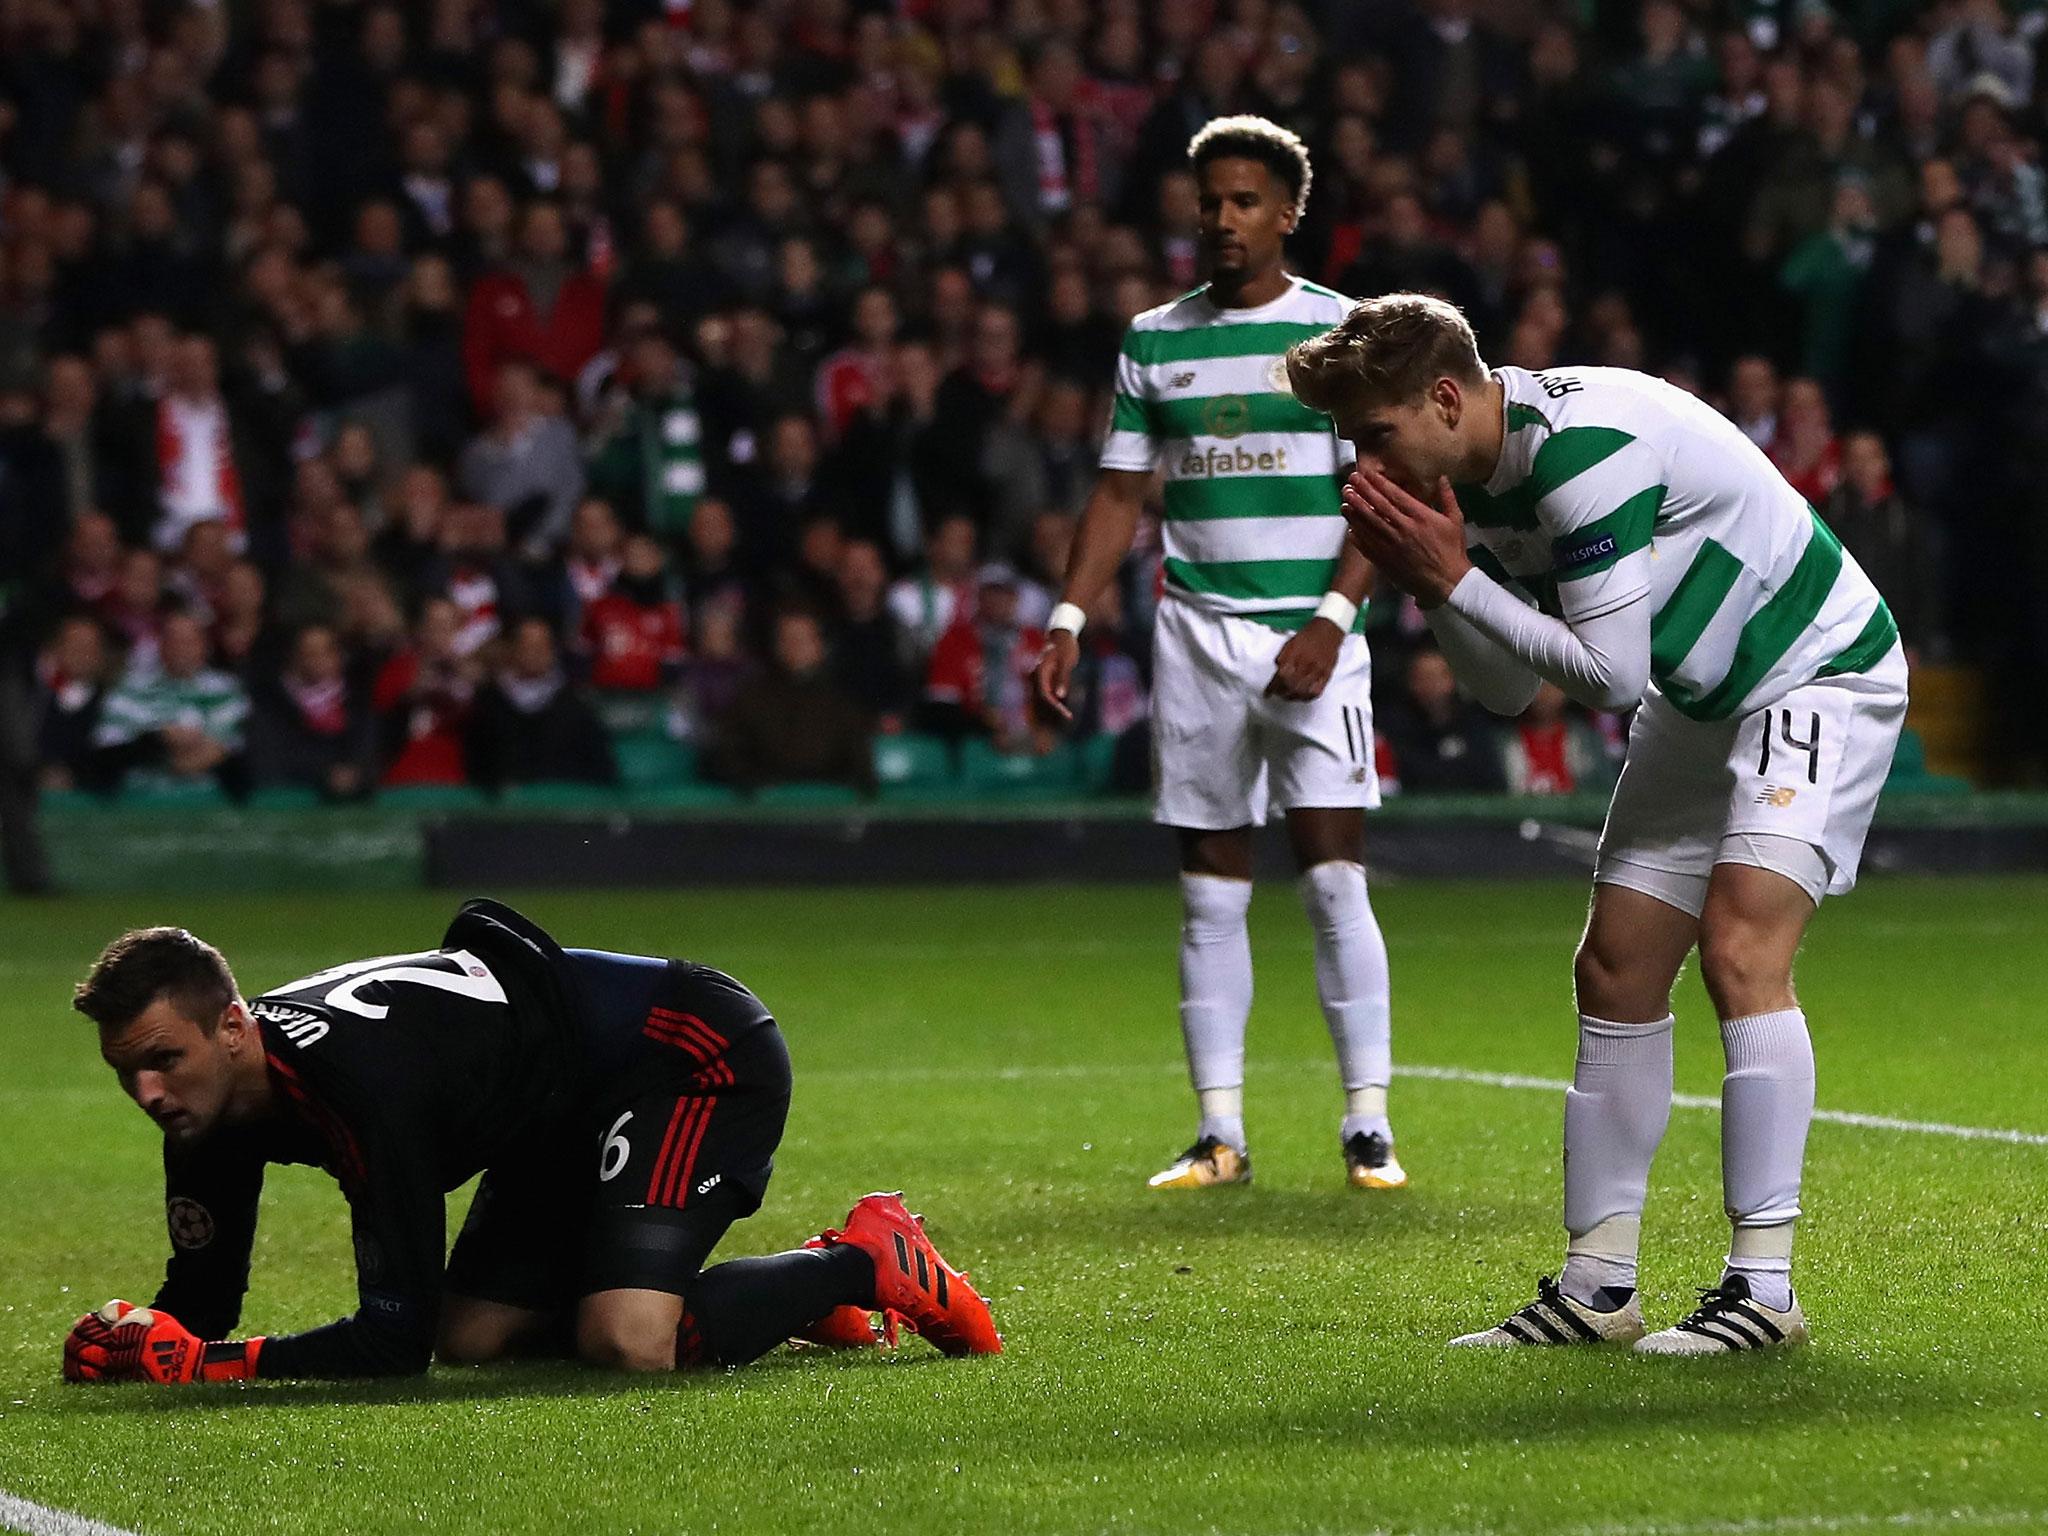 Celtic put up a fight but were unable to get the result